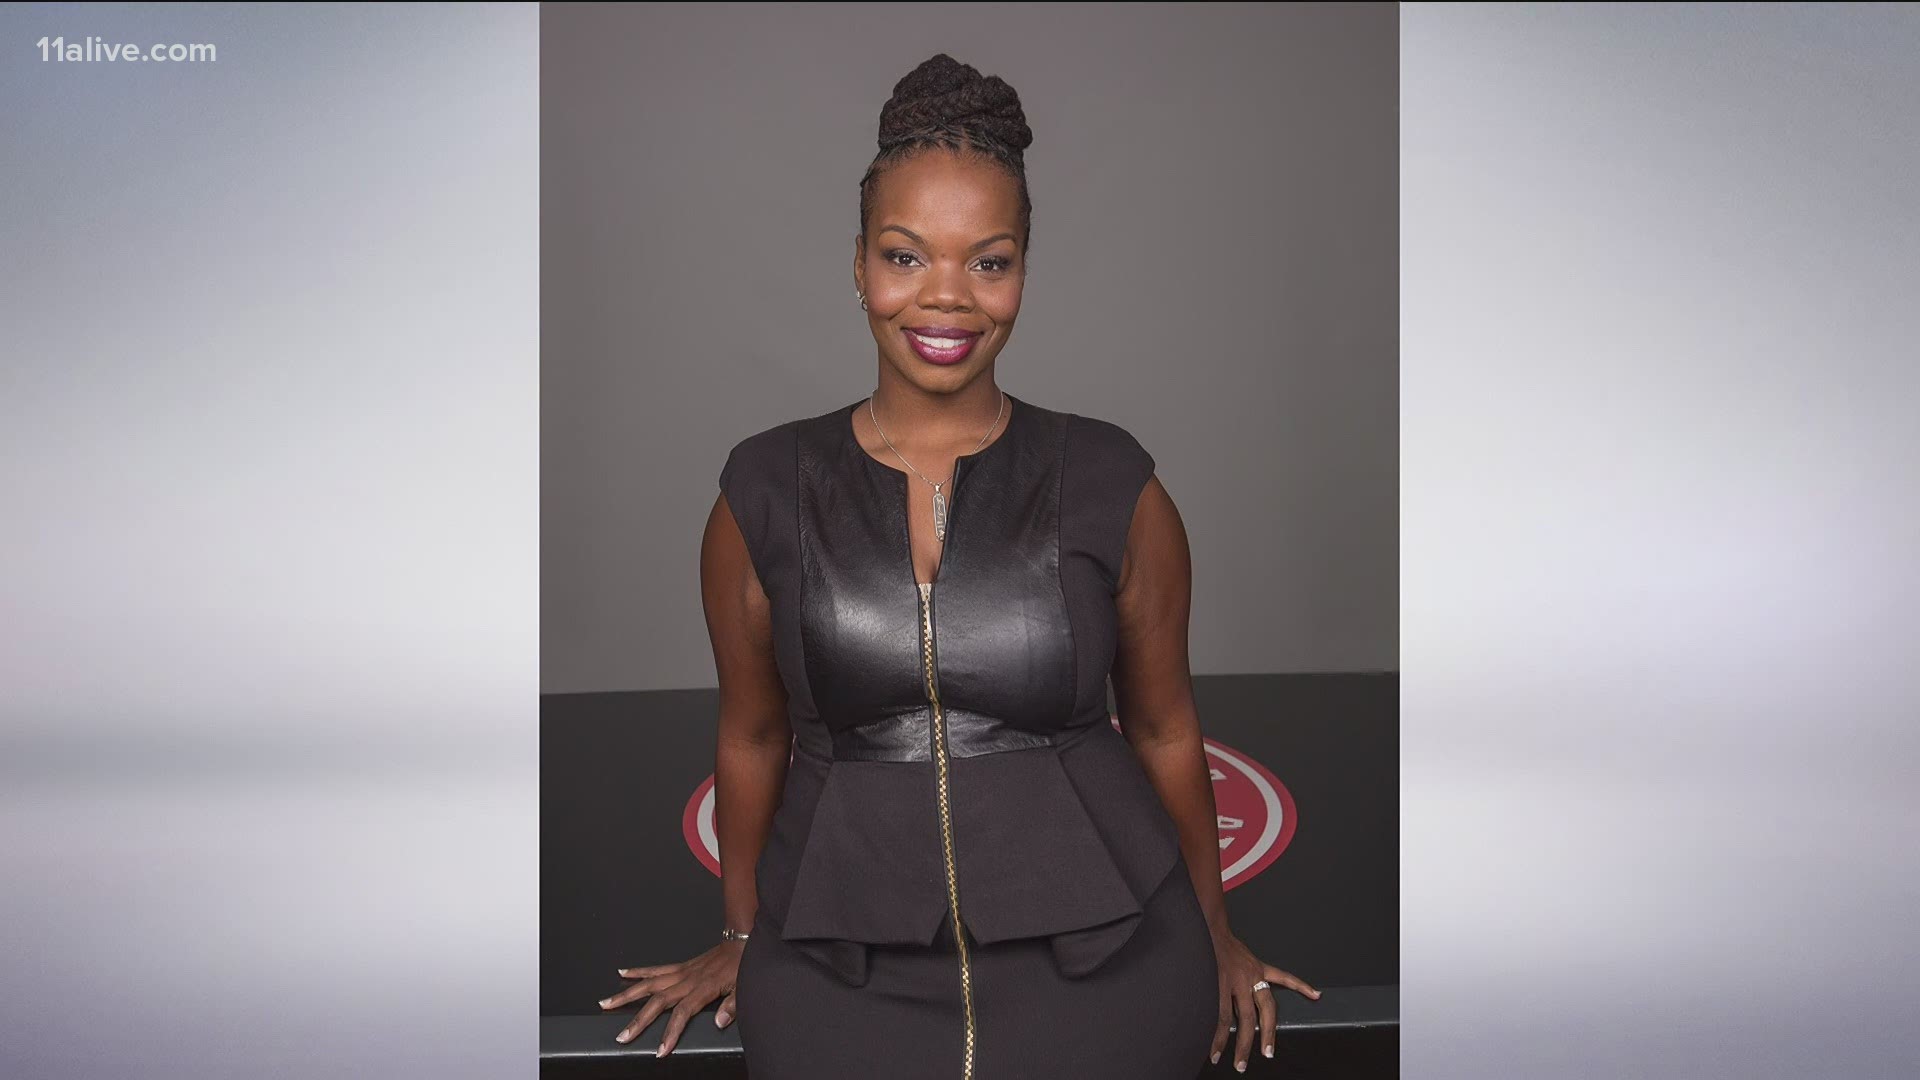 Proctor is the executive vice president and chief marketing officer for the Hawks and State Farm Arena where she continues to be a trailblazer.